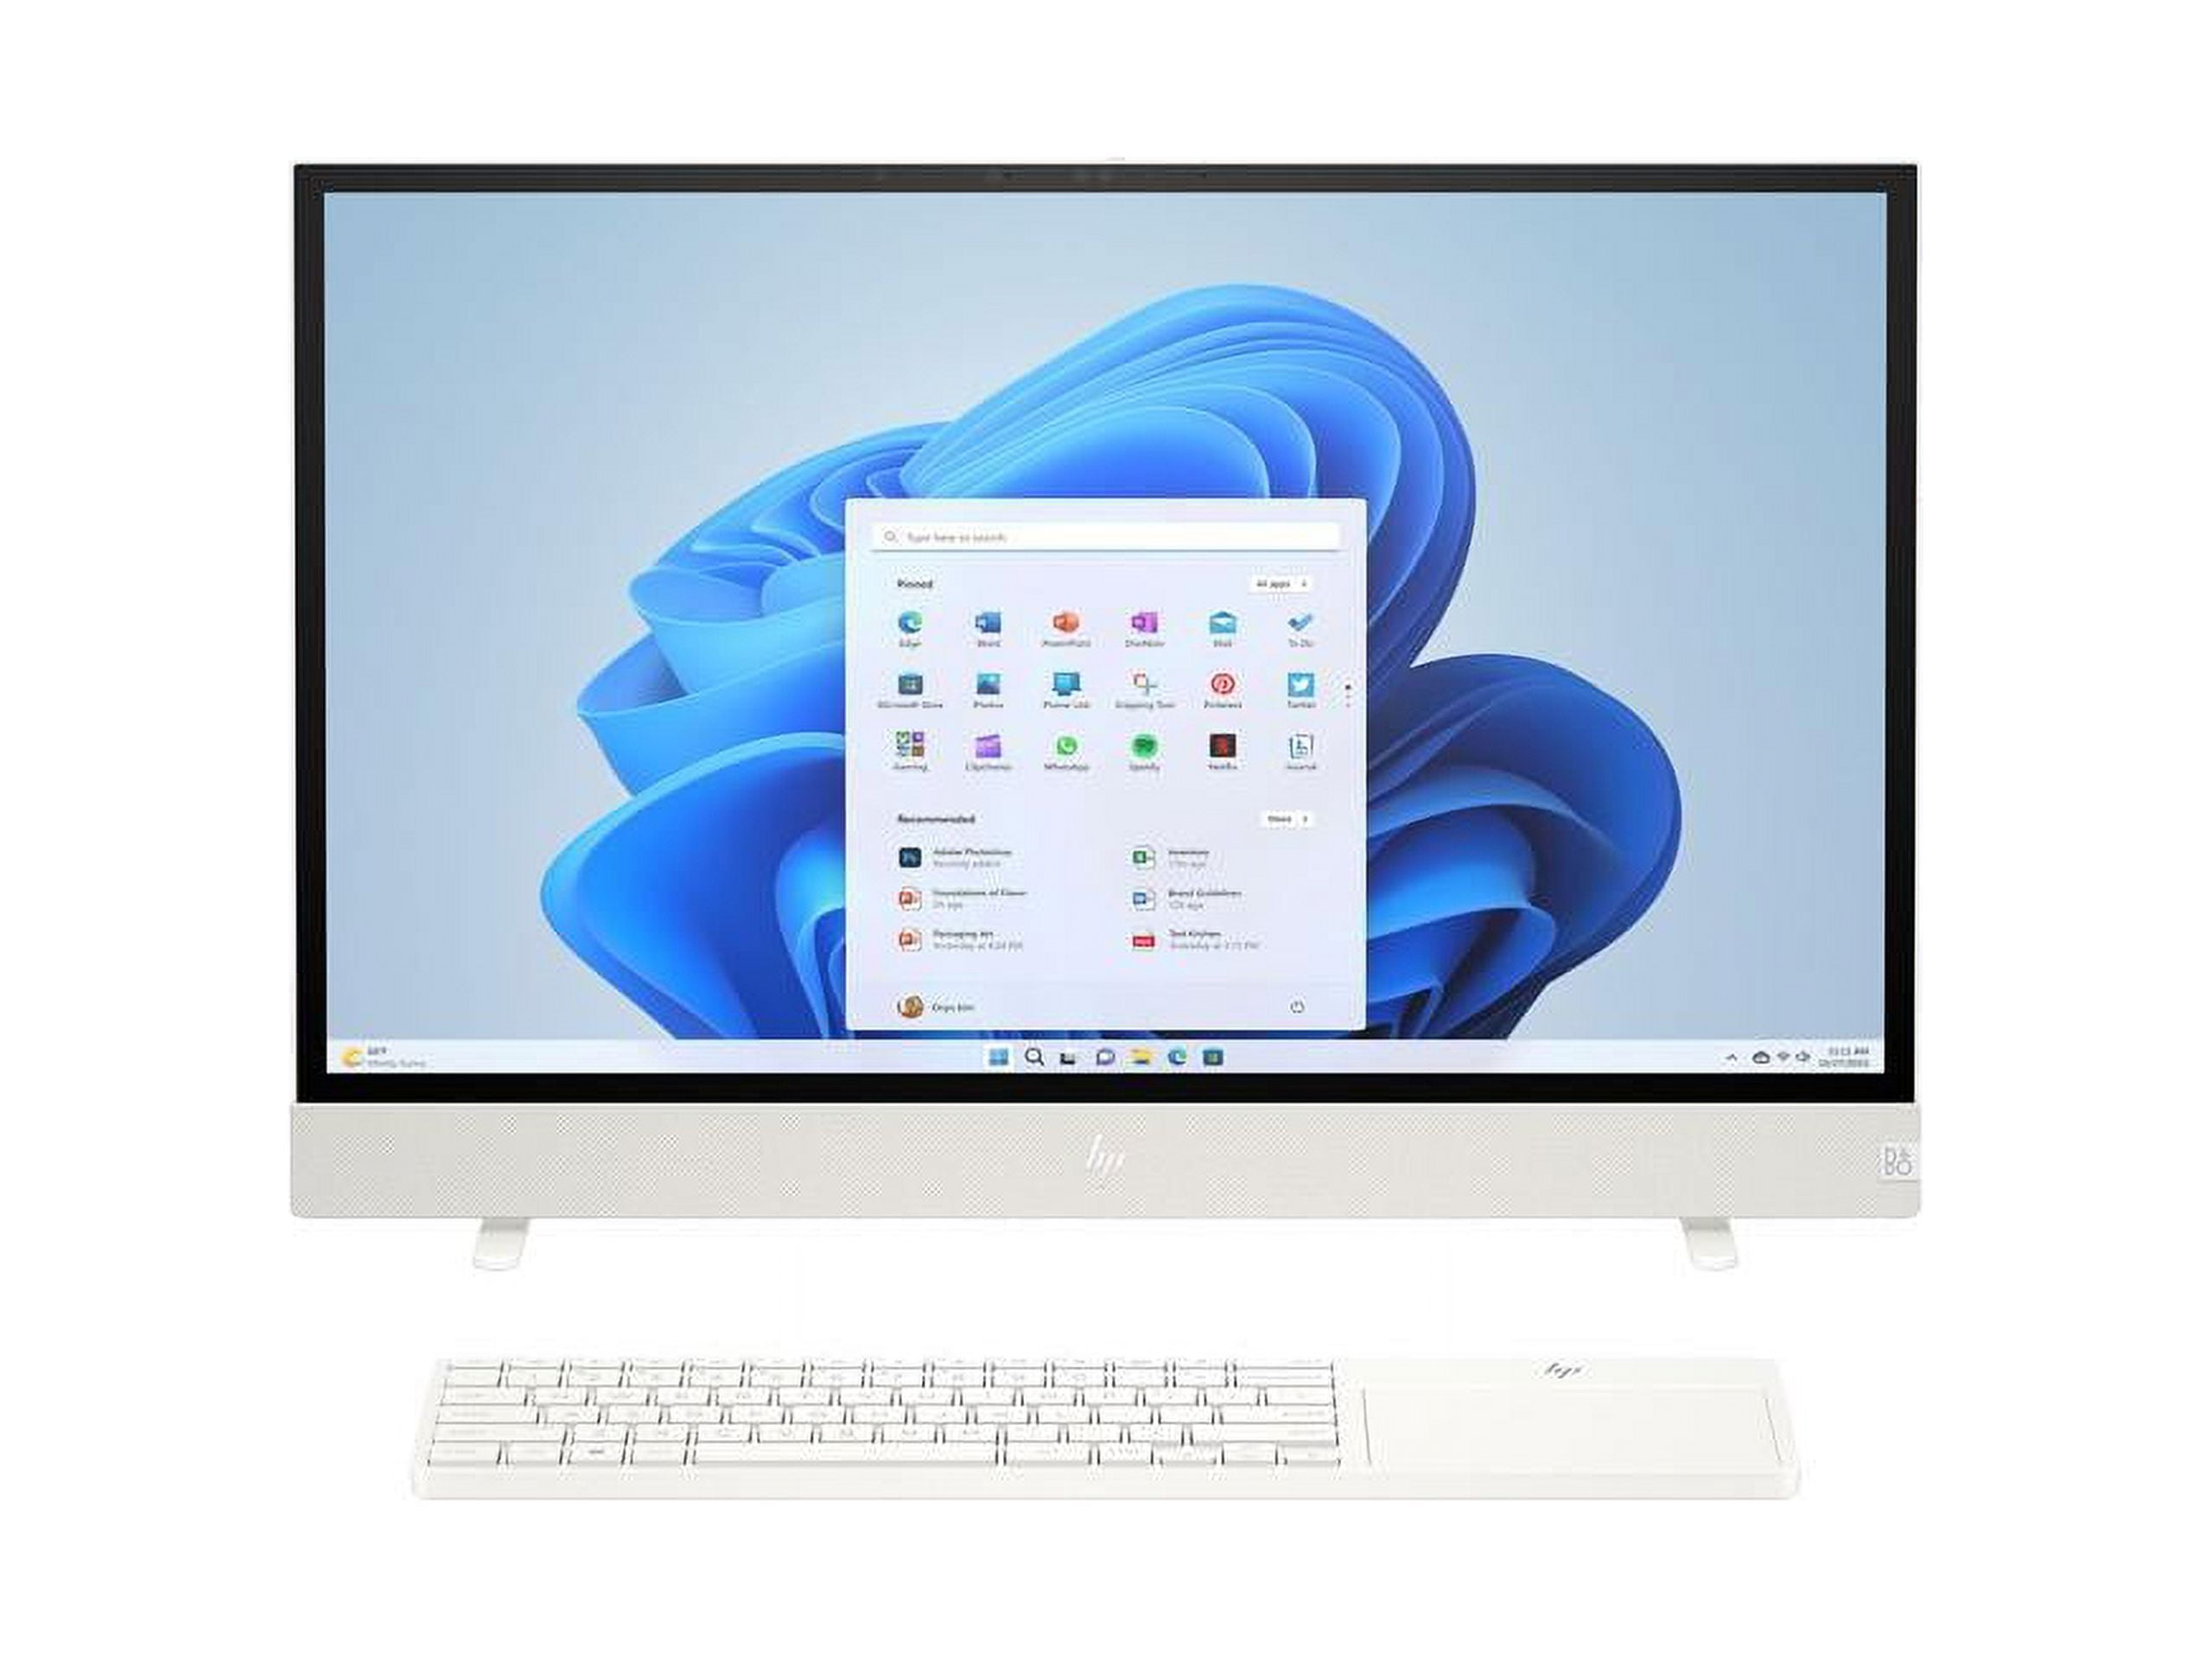 HP Envy Move 23.8 inch All-in-One PC, QHD Display, 13th Generation 